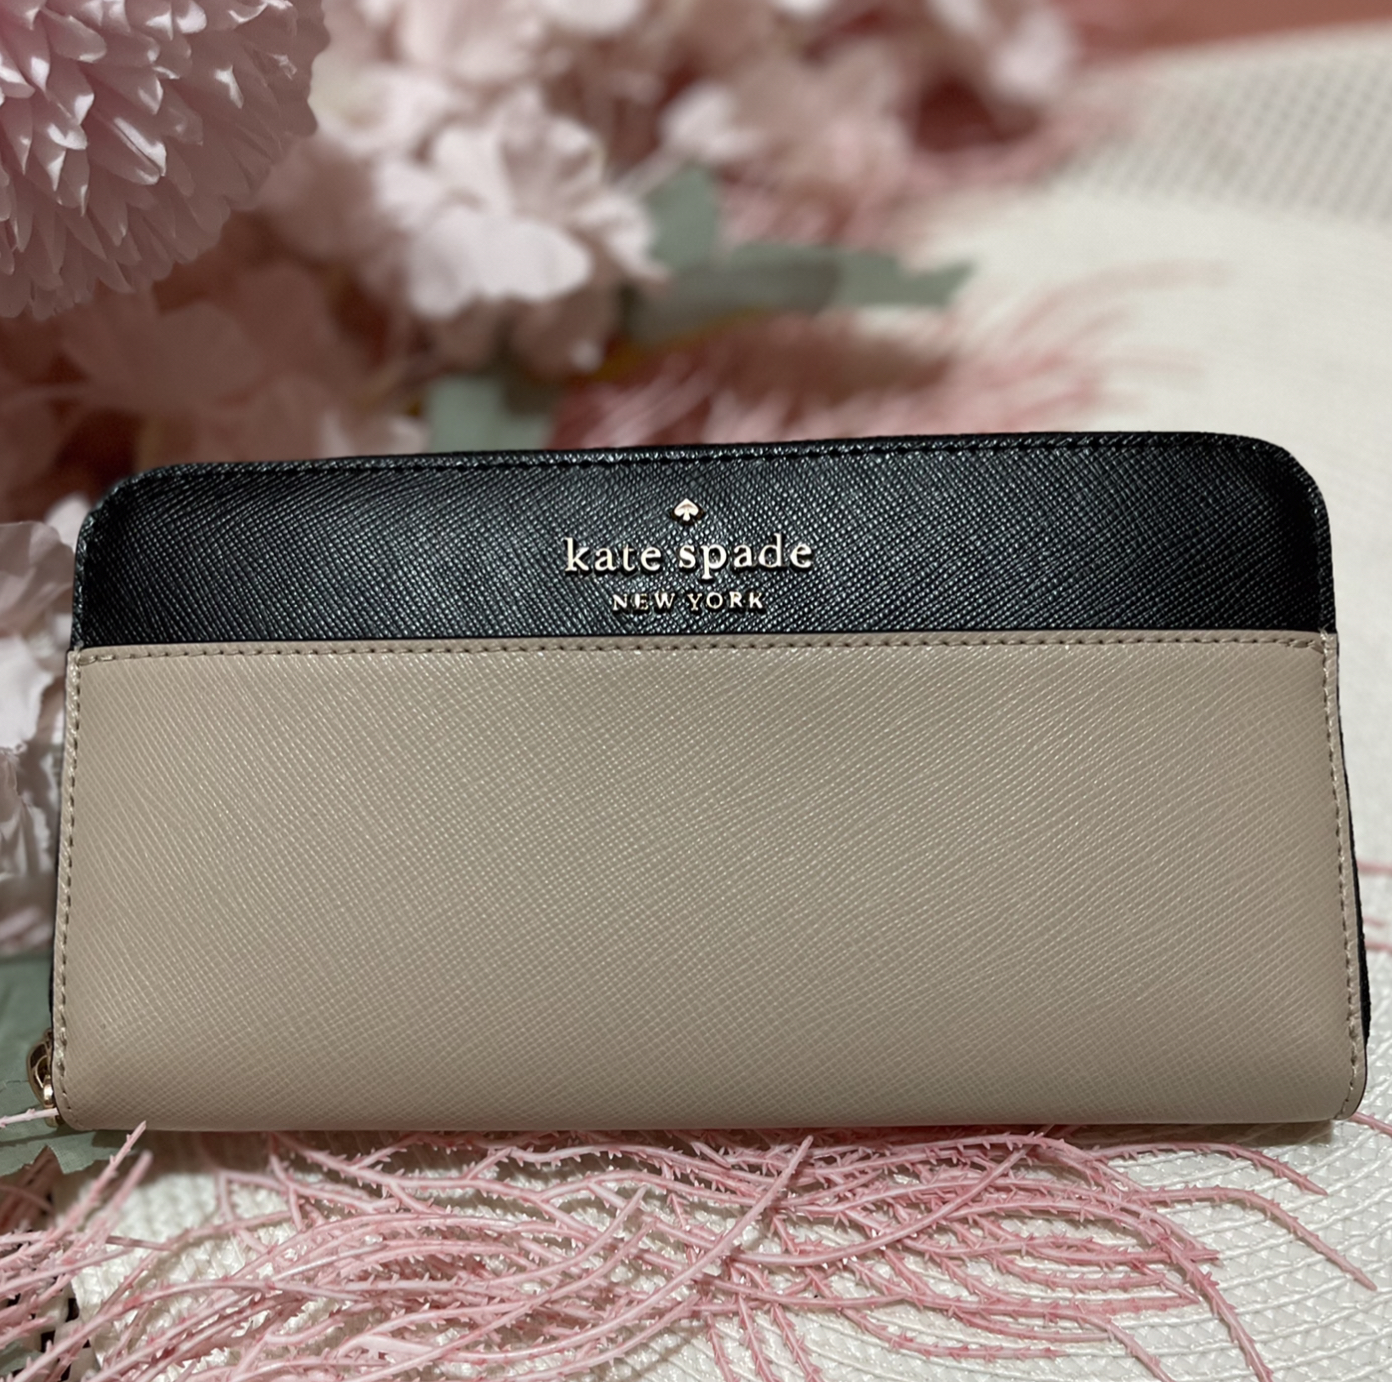 Kate Spade Staci Colorblock Saffiano Large Continental Wallet